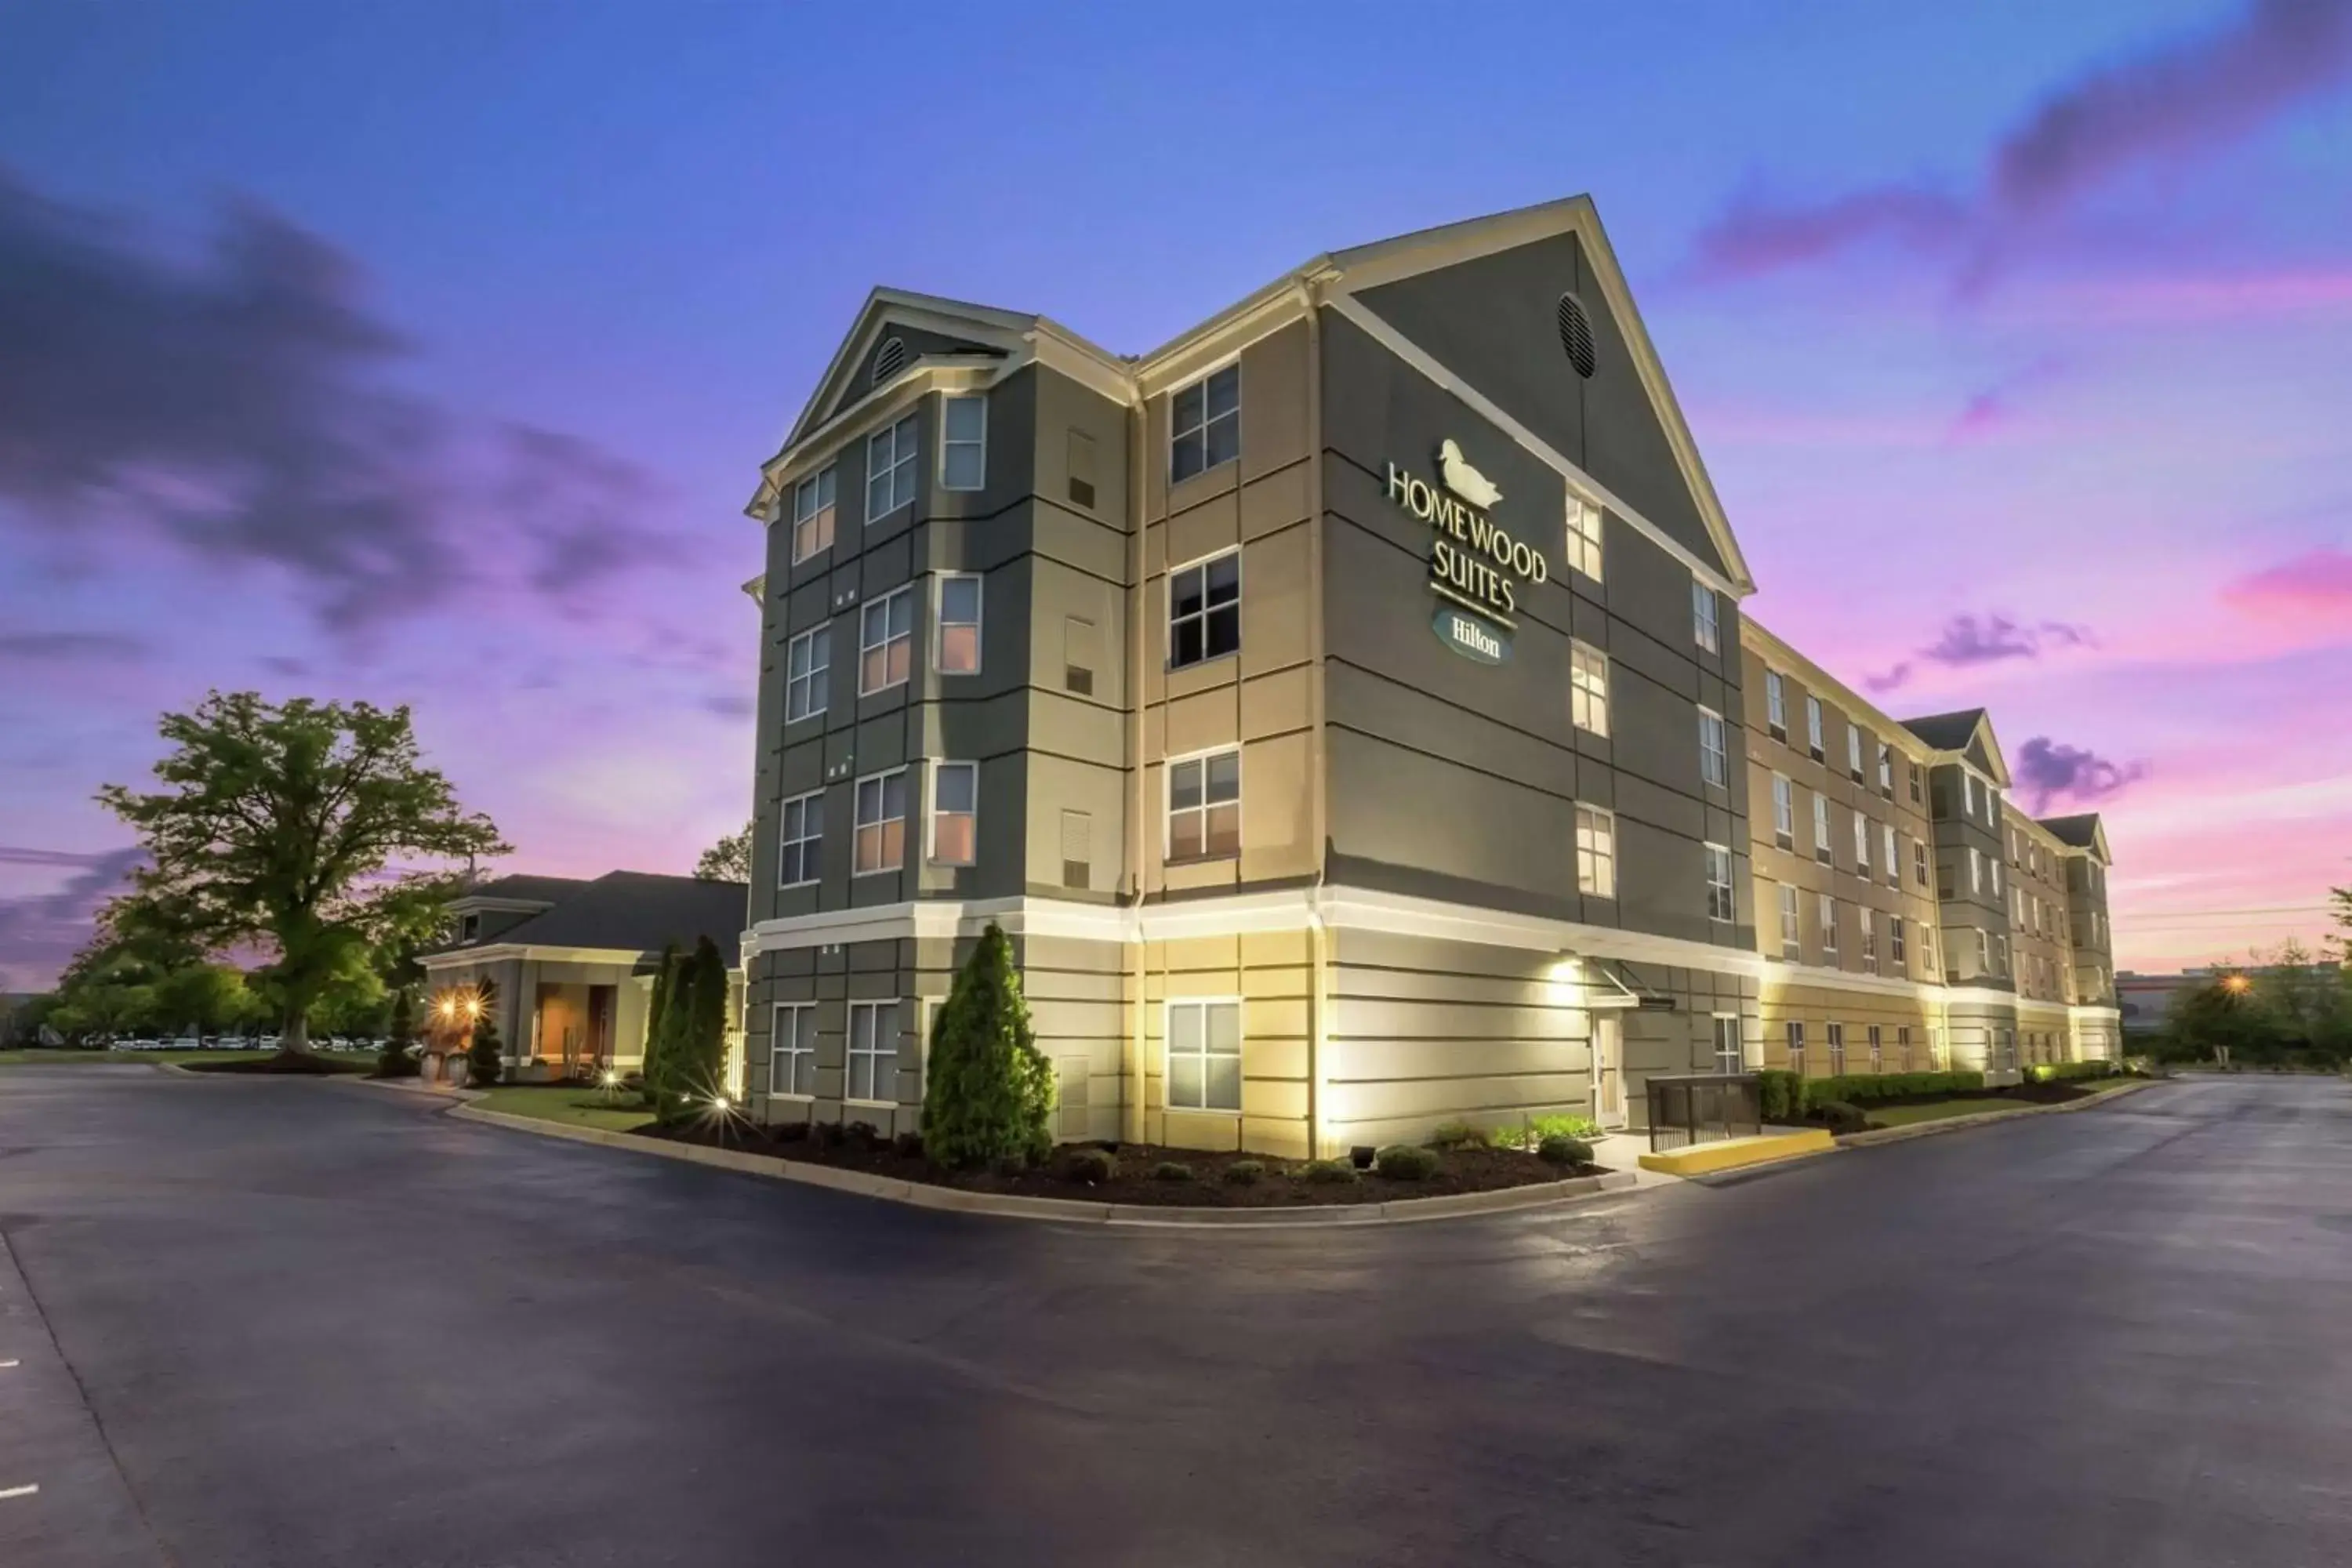 Property Building in Homewood Suites by Hilton Greenville